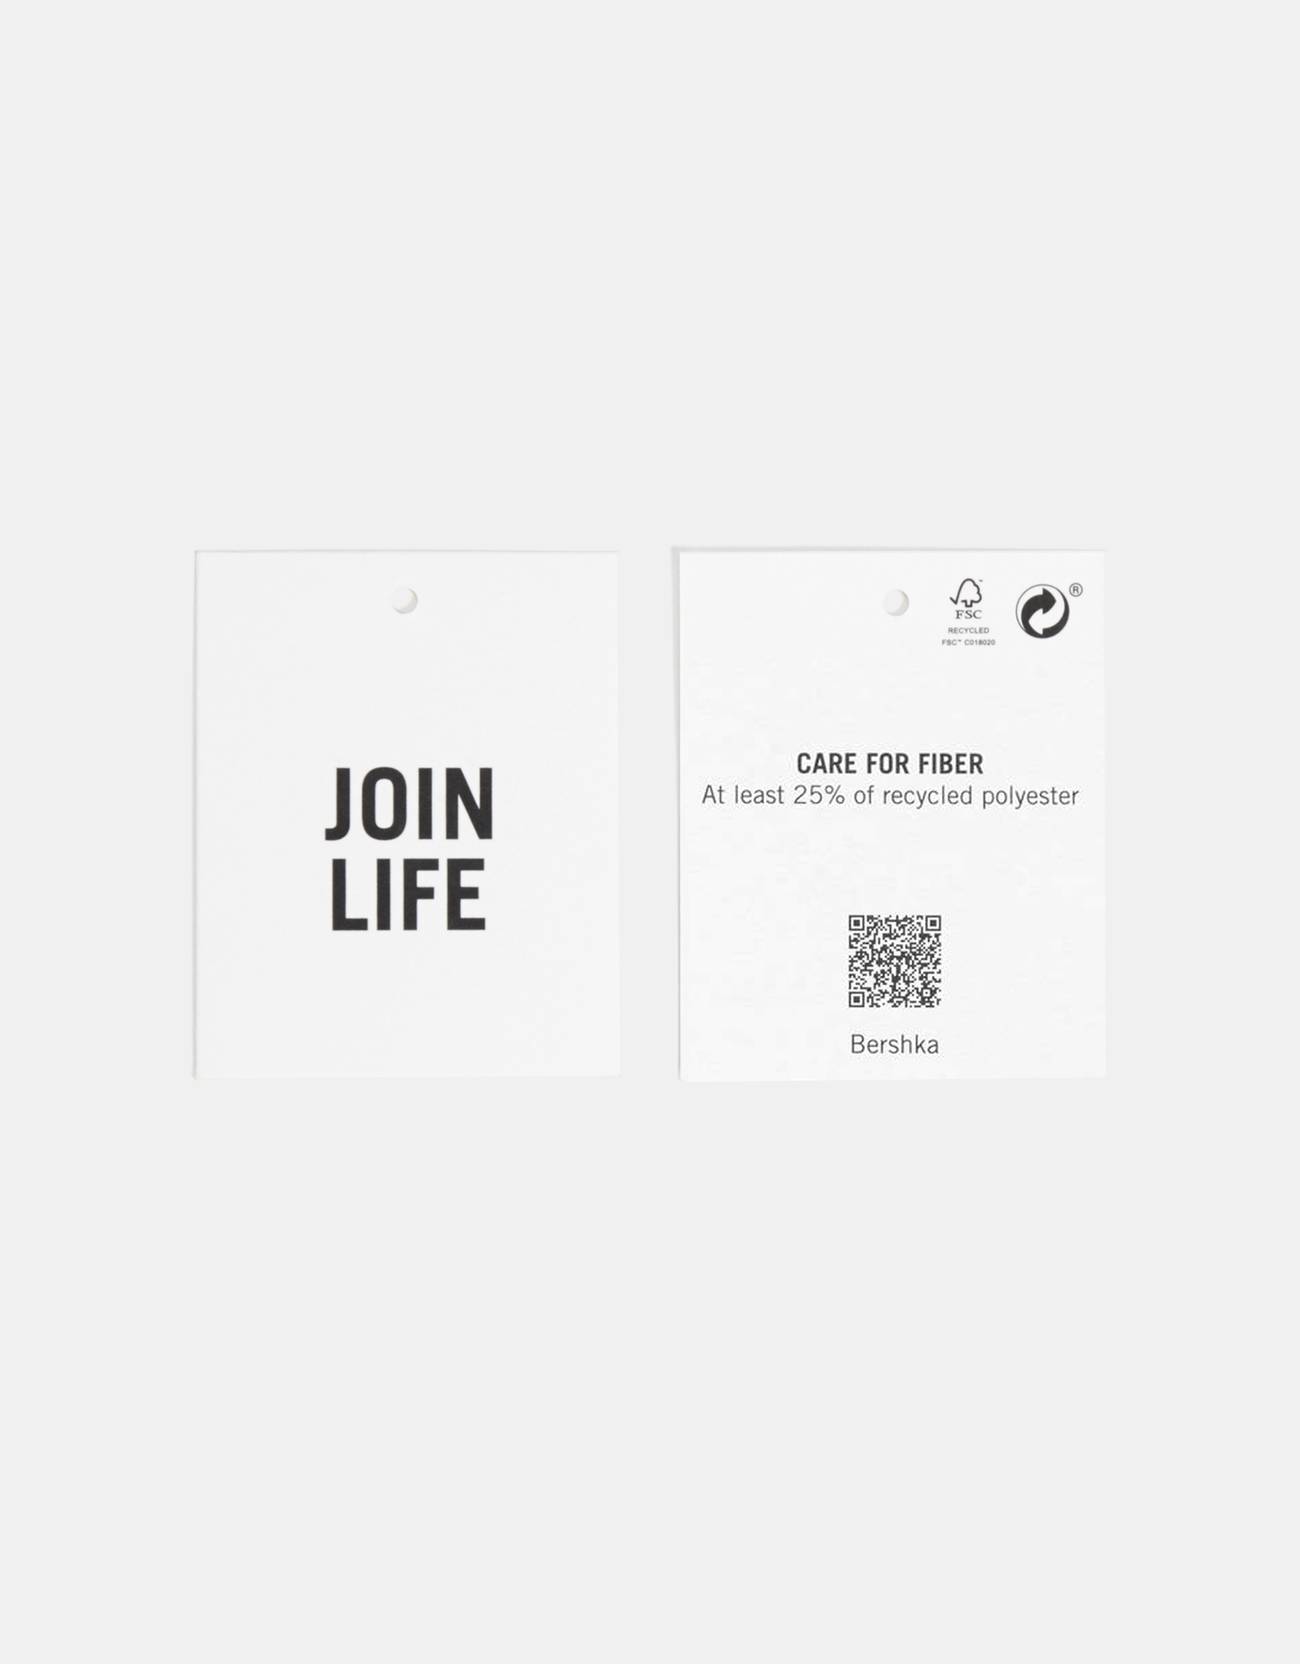 Join life